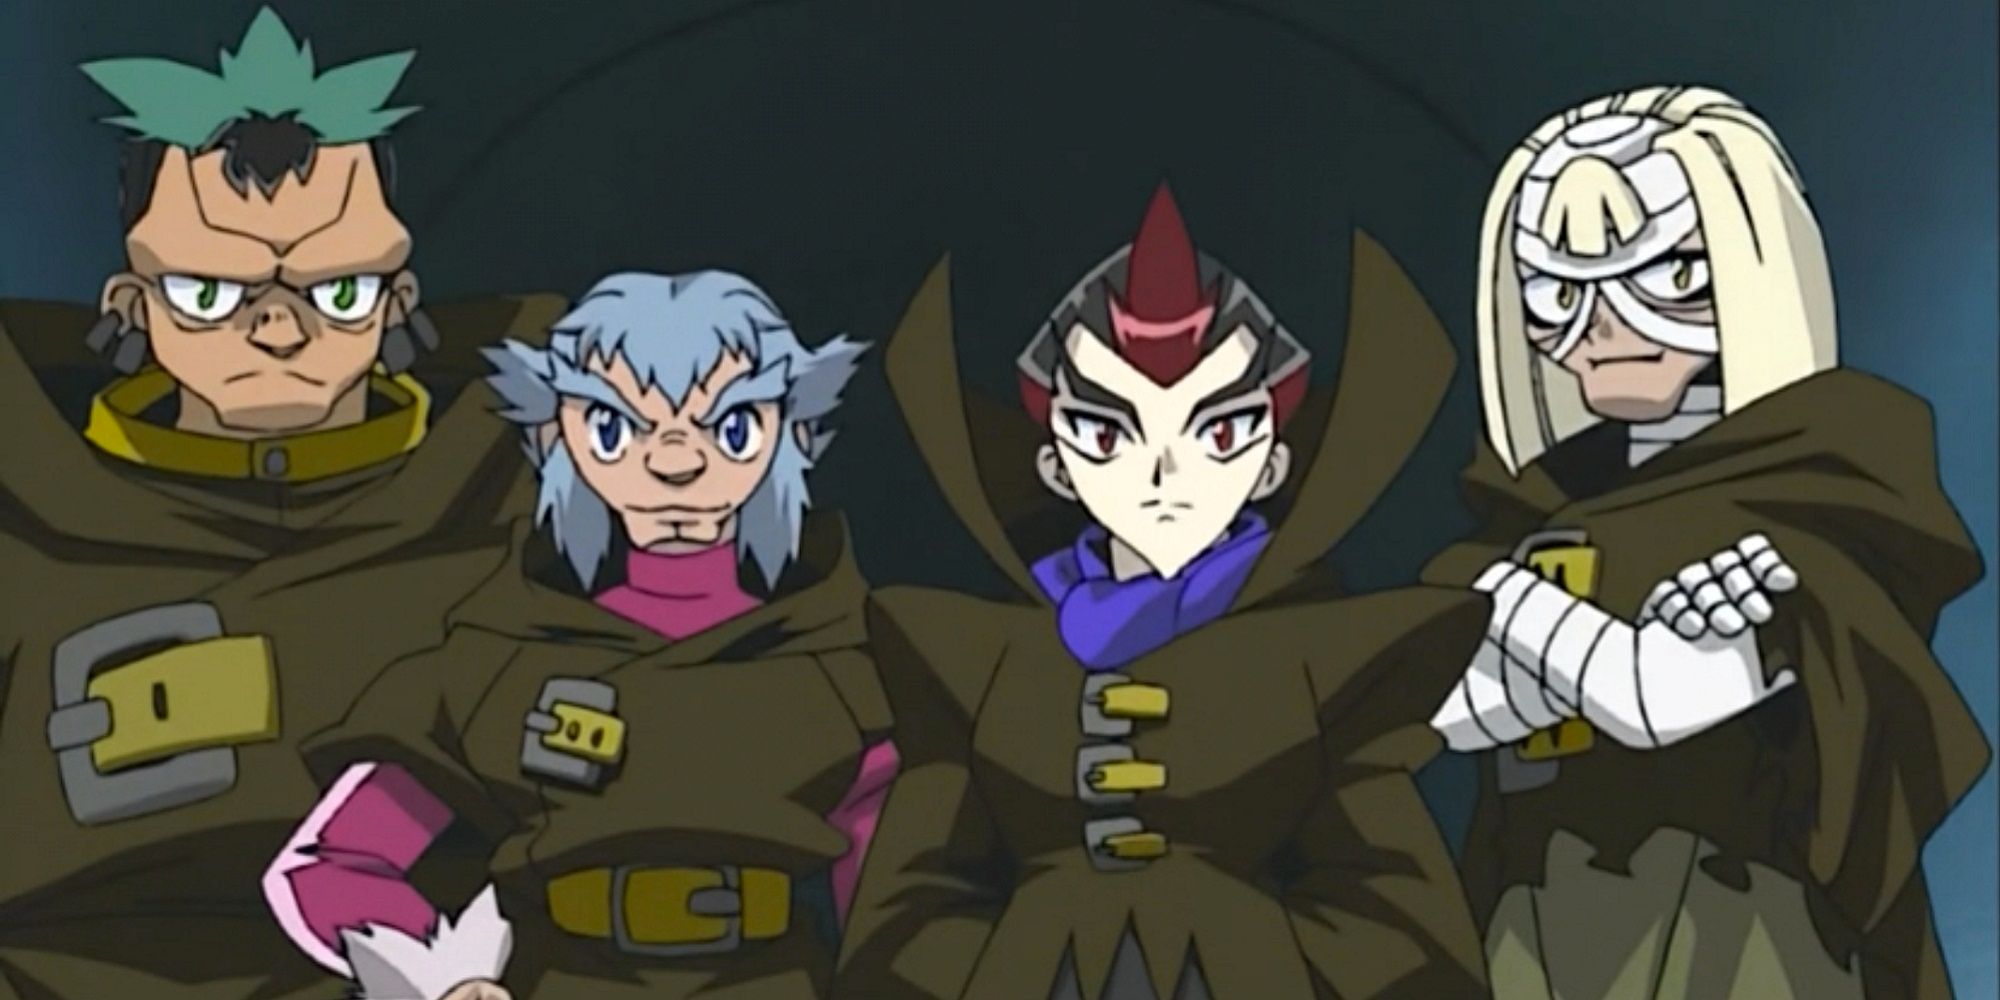 The Dark Bladers (Better known as Team WHO) in Beyblade.